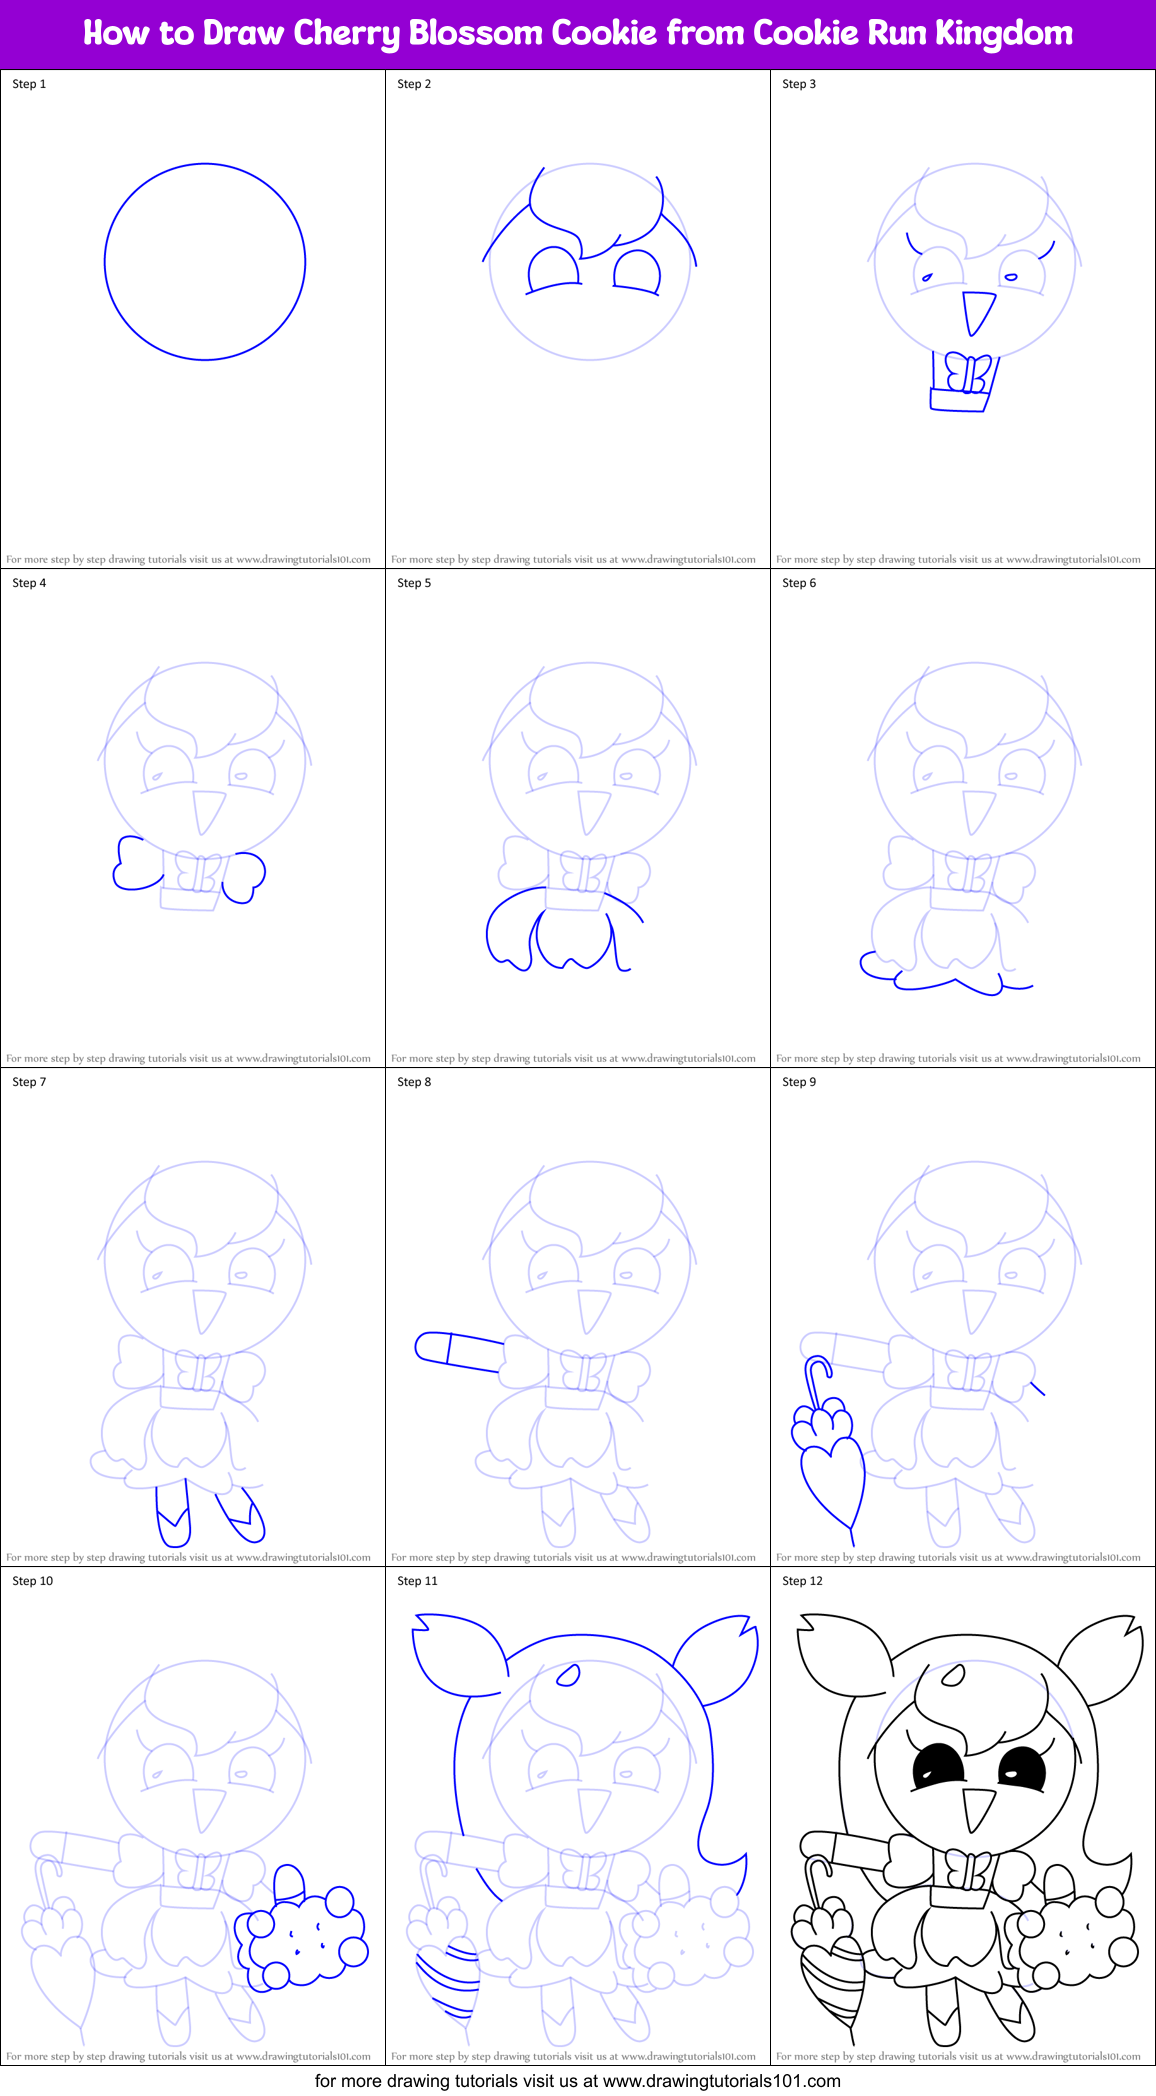 How to Draw Cherry Blossom Cookie from Cookie Run Kingdom printable ...